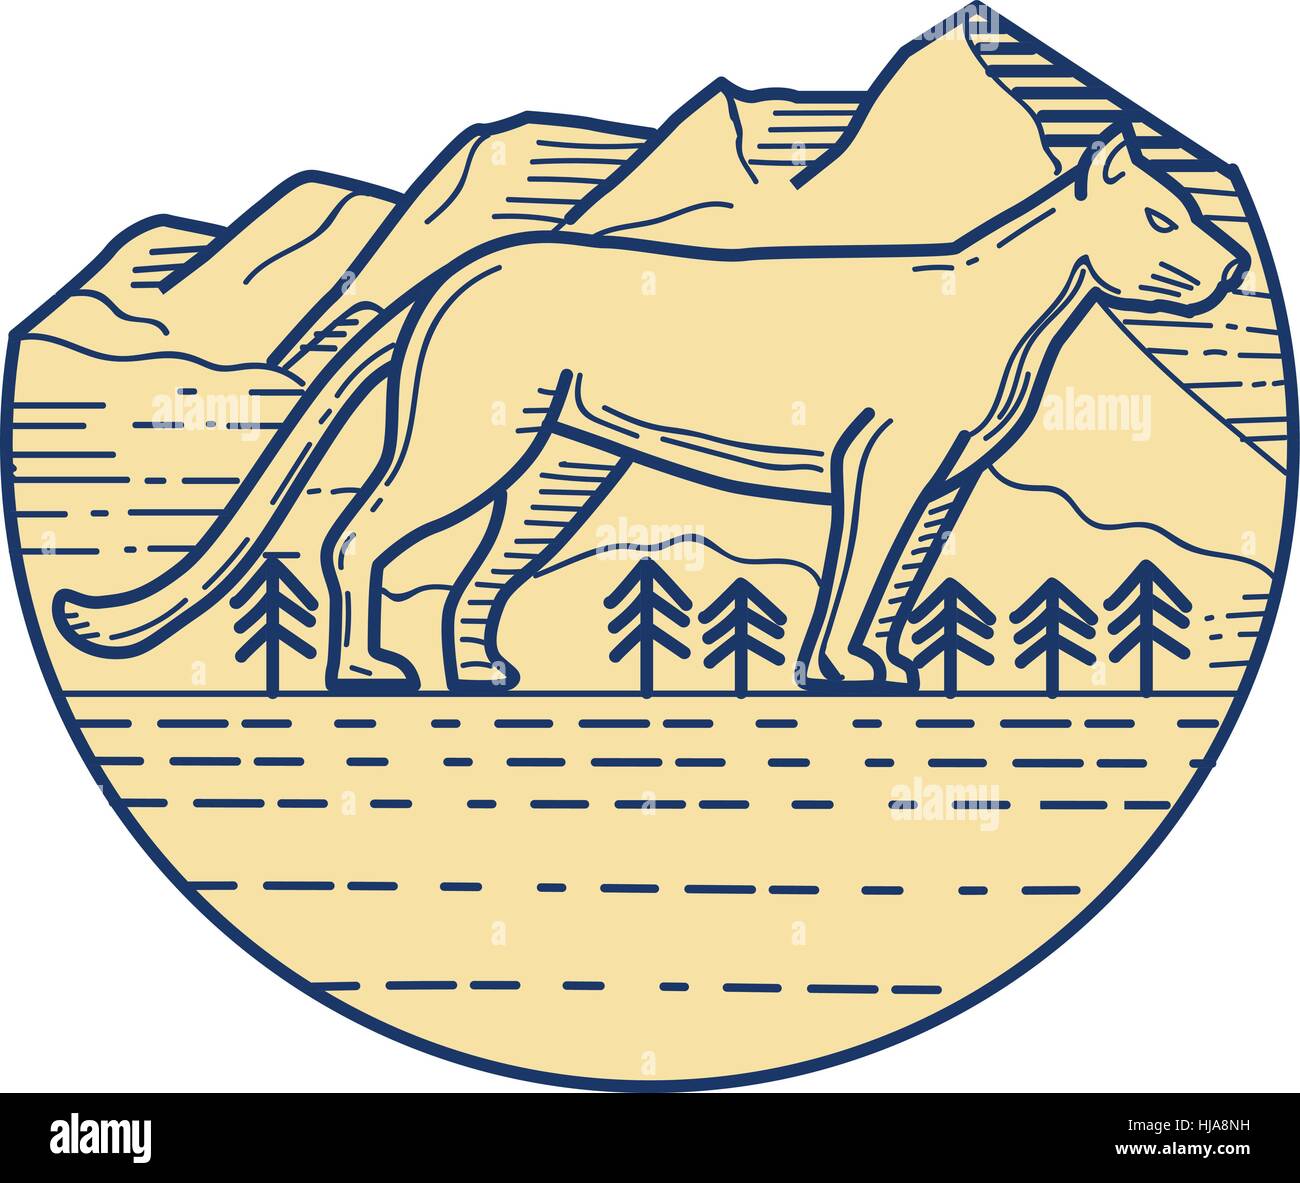 Mono line style illustration of a cougar mountain lion viewed from the side set inside half circle with mountain and trees in the background. Stock Vector